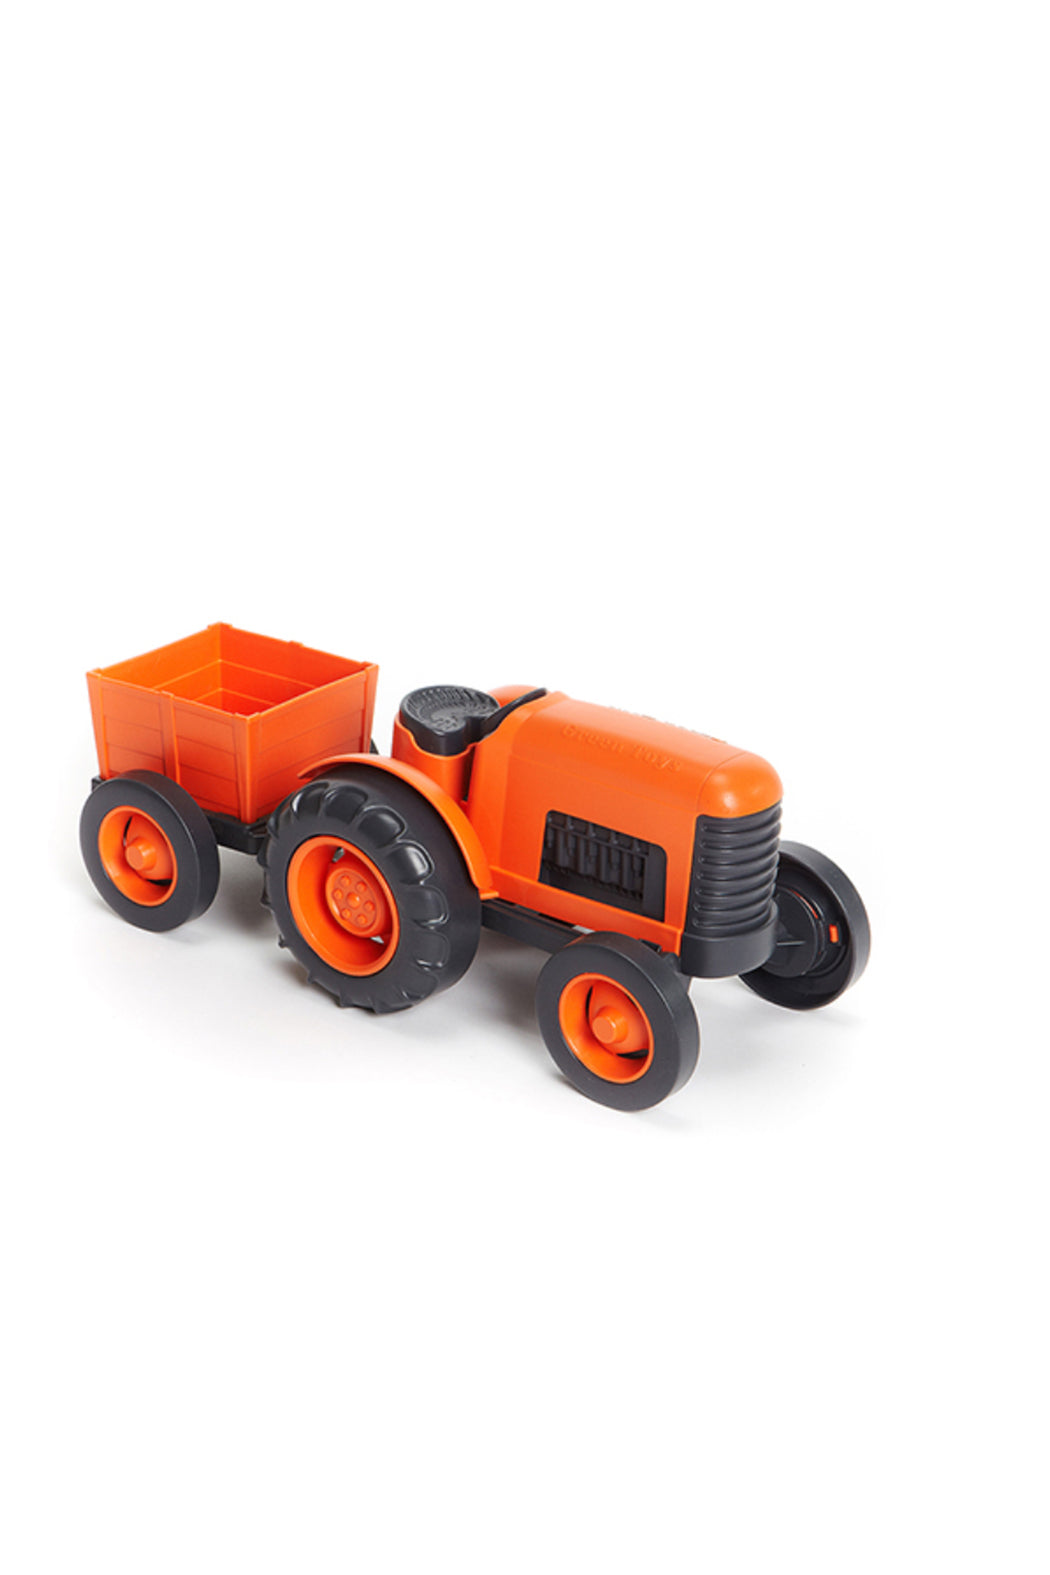 Green Toys Tractor